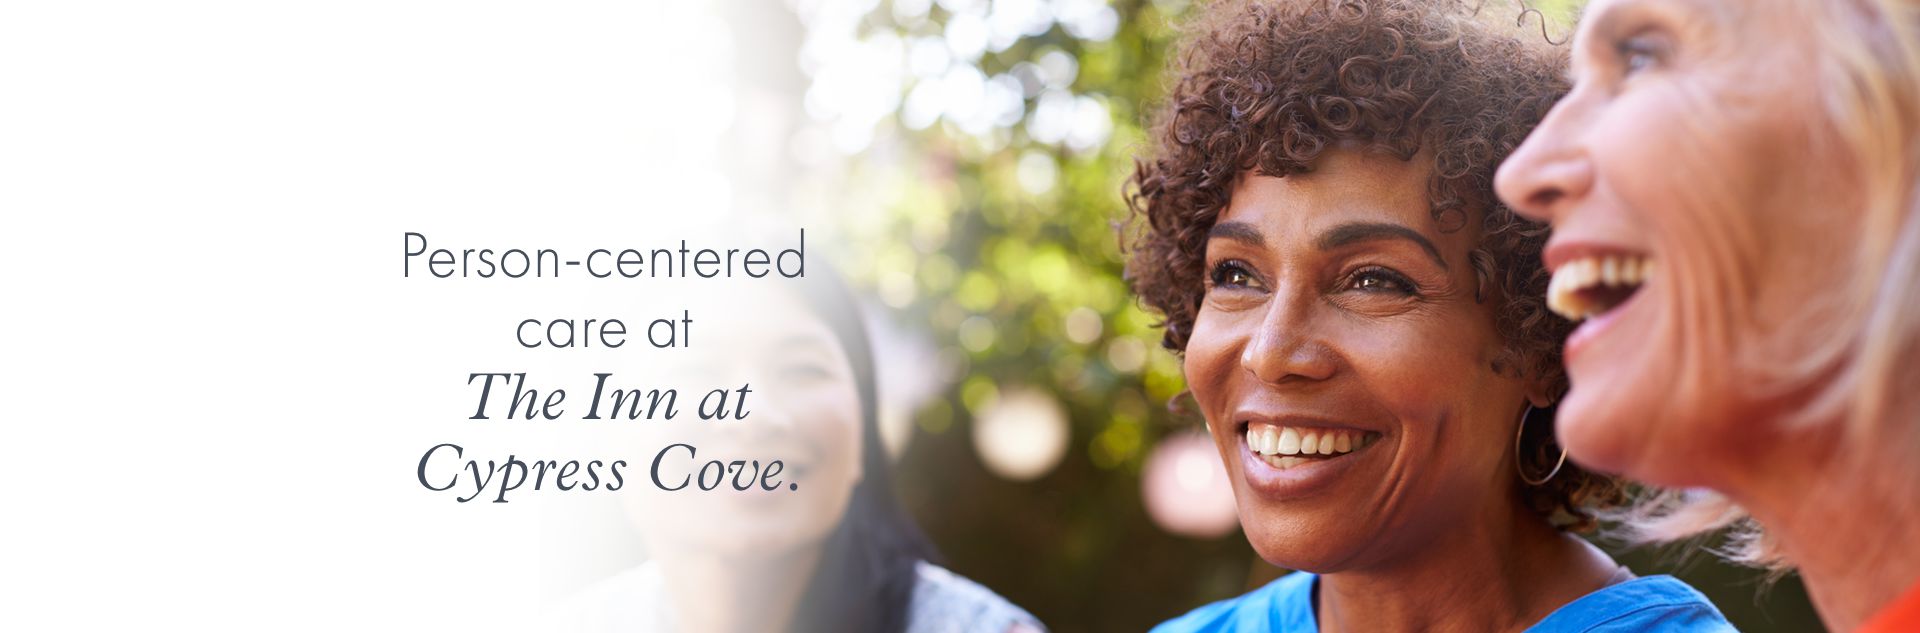 Person-centered care at The Inn at Cypress Cove.